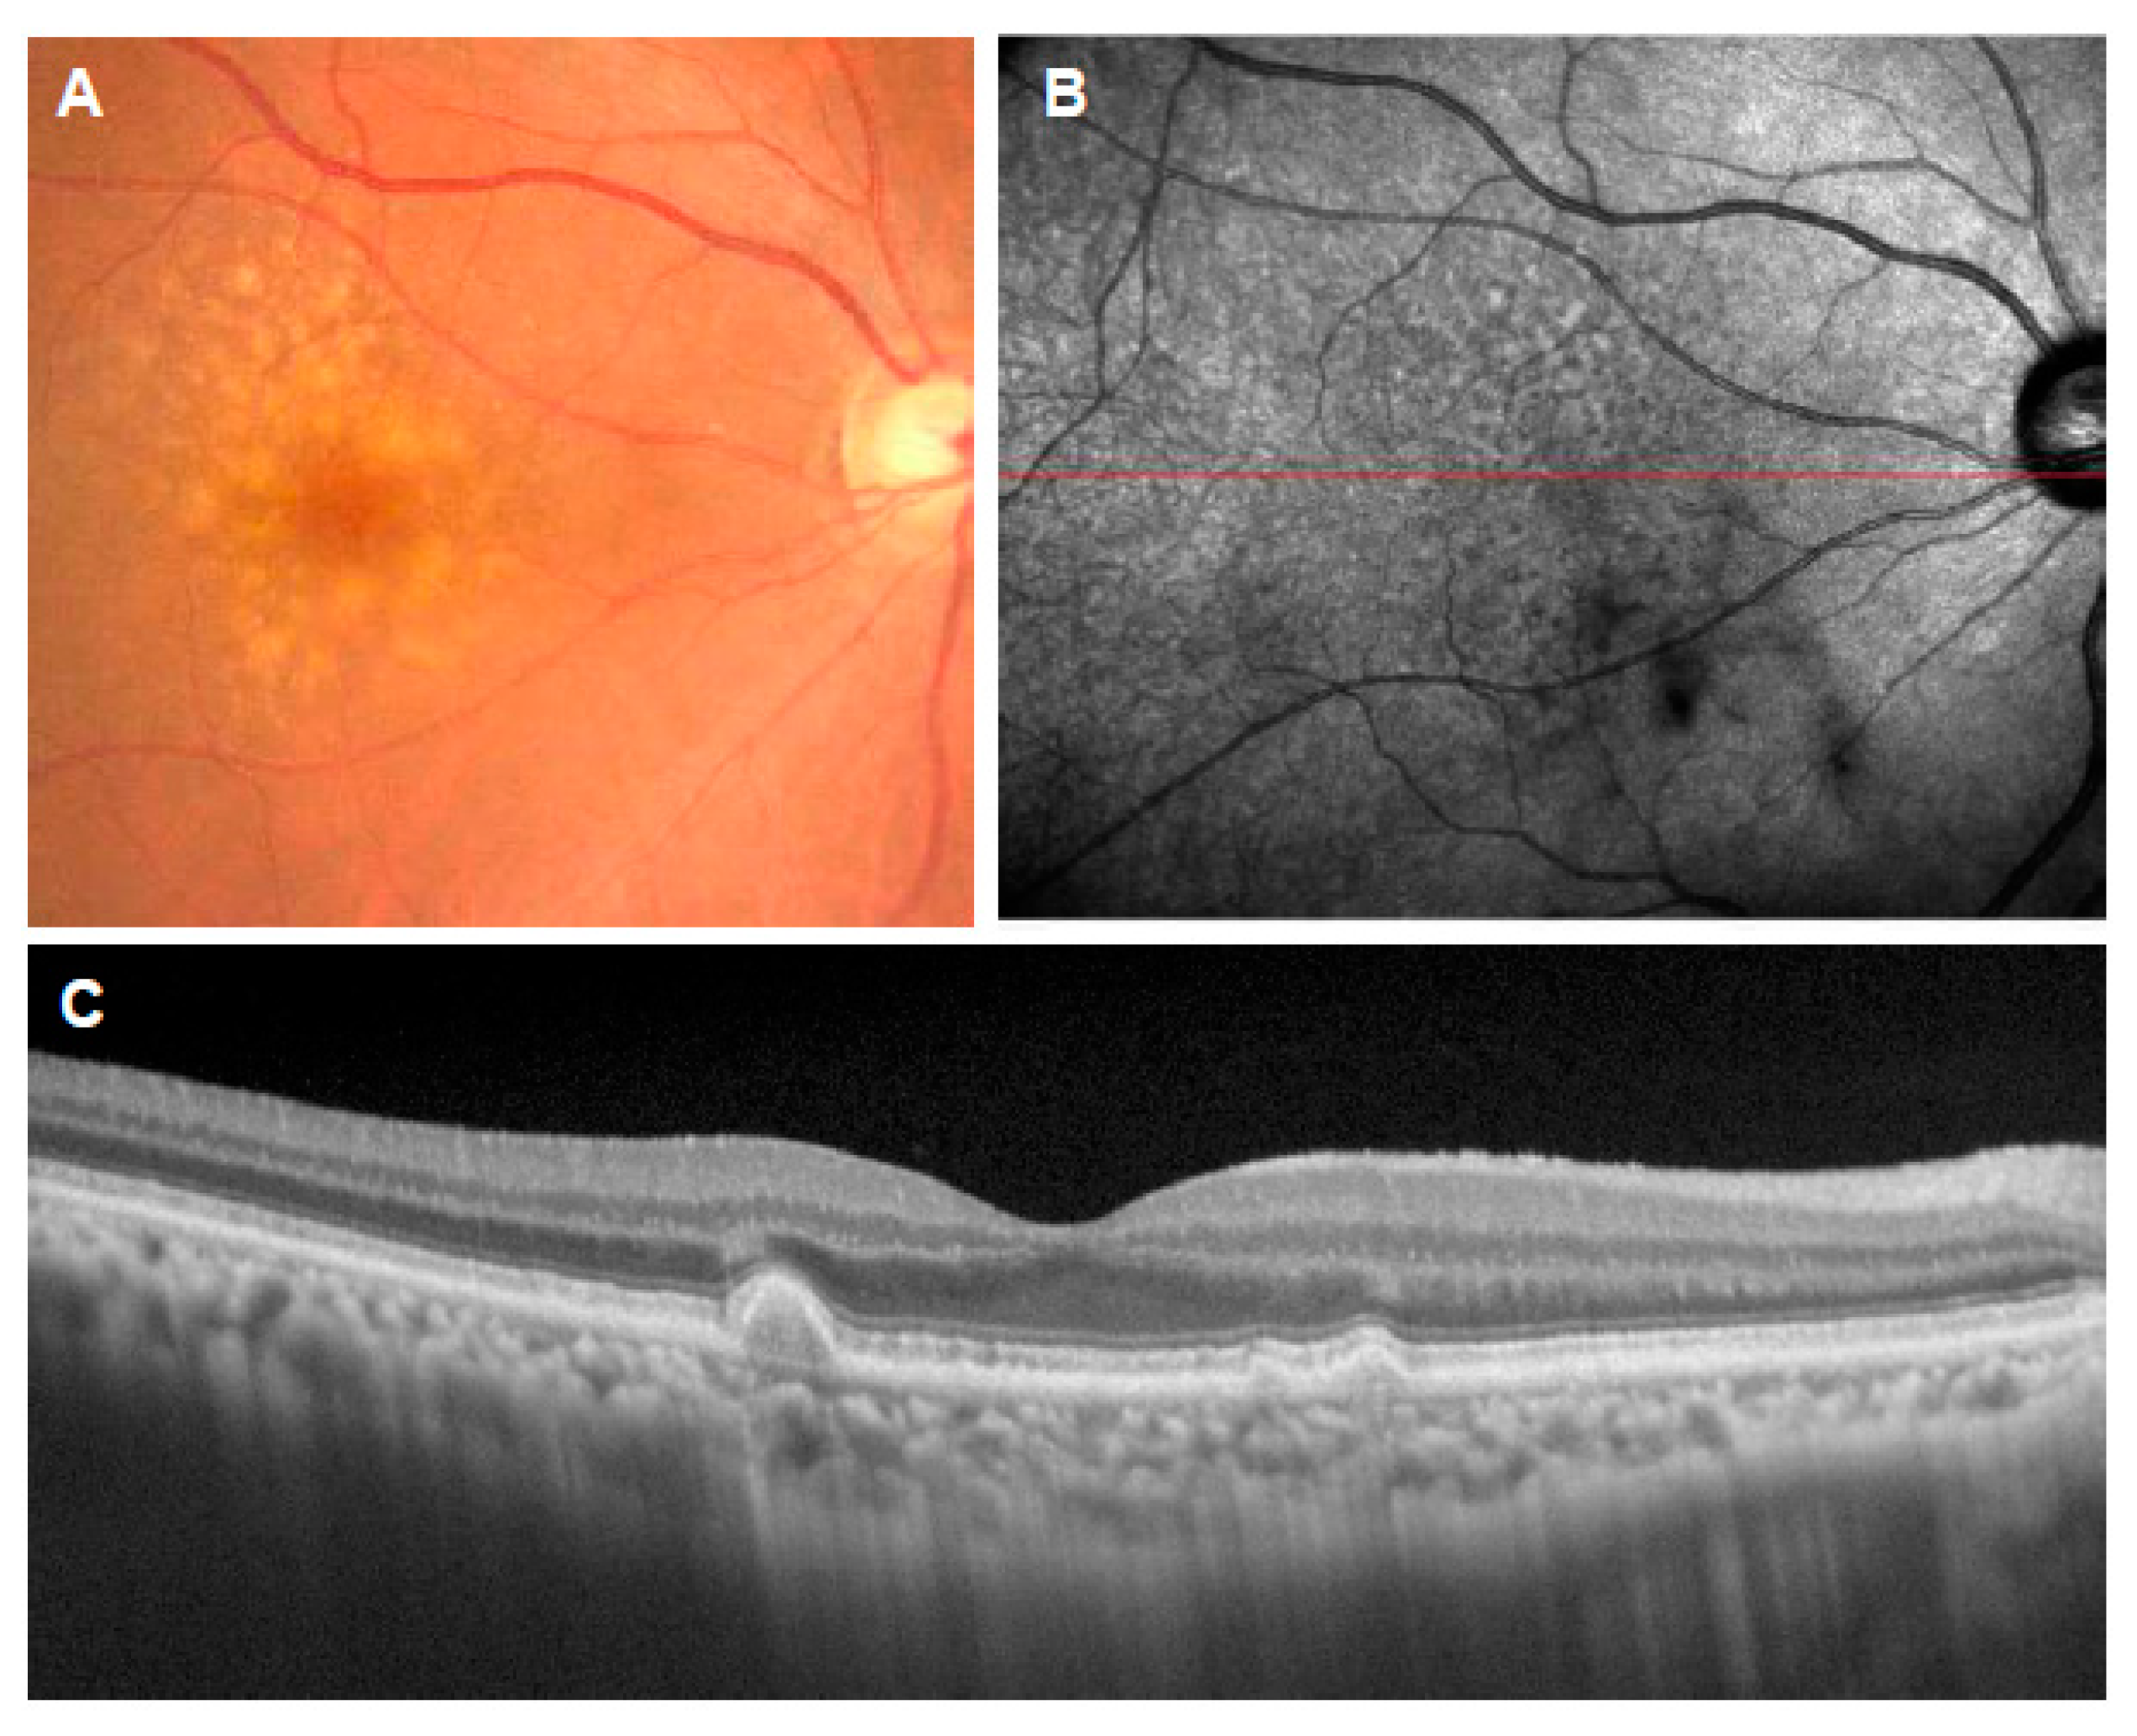 JCM | Free Full-Text | Early Stages of Age-Related Macular Degeneration ...